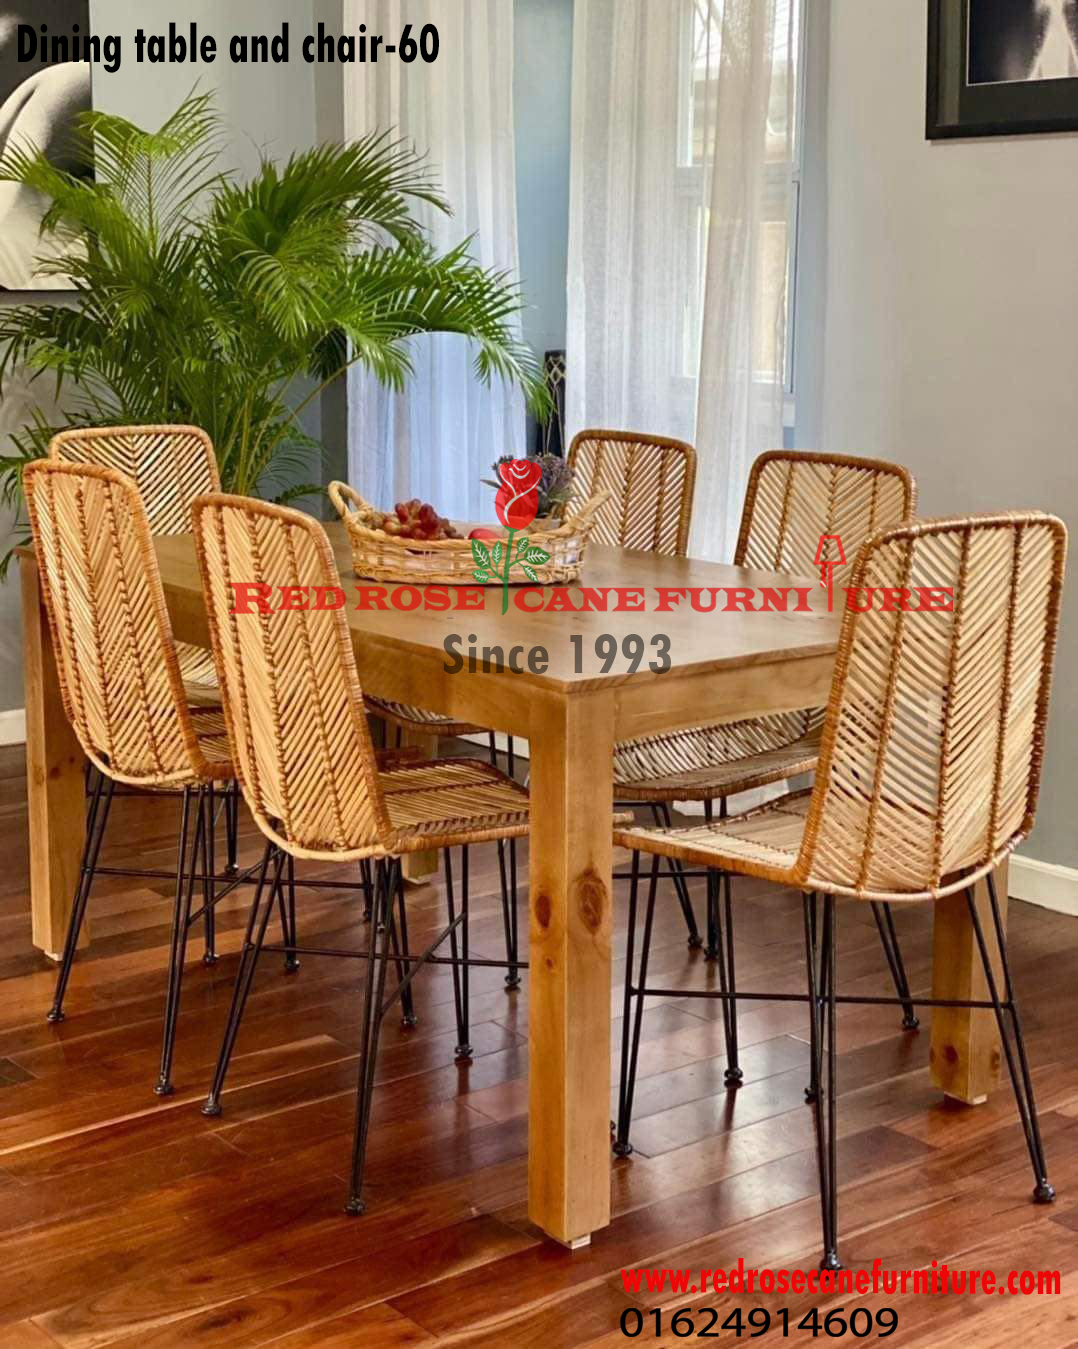 Dining Table With Chair-60